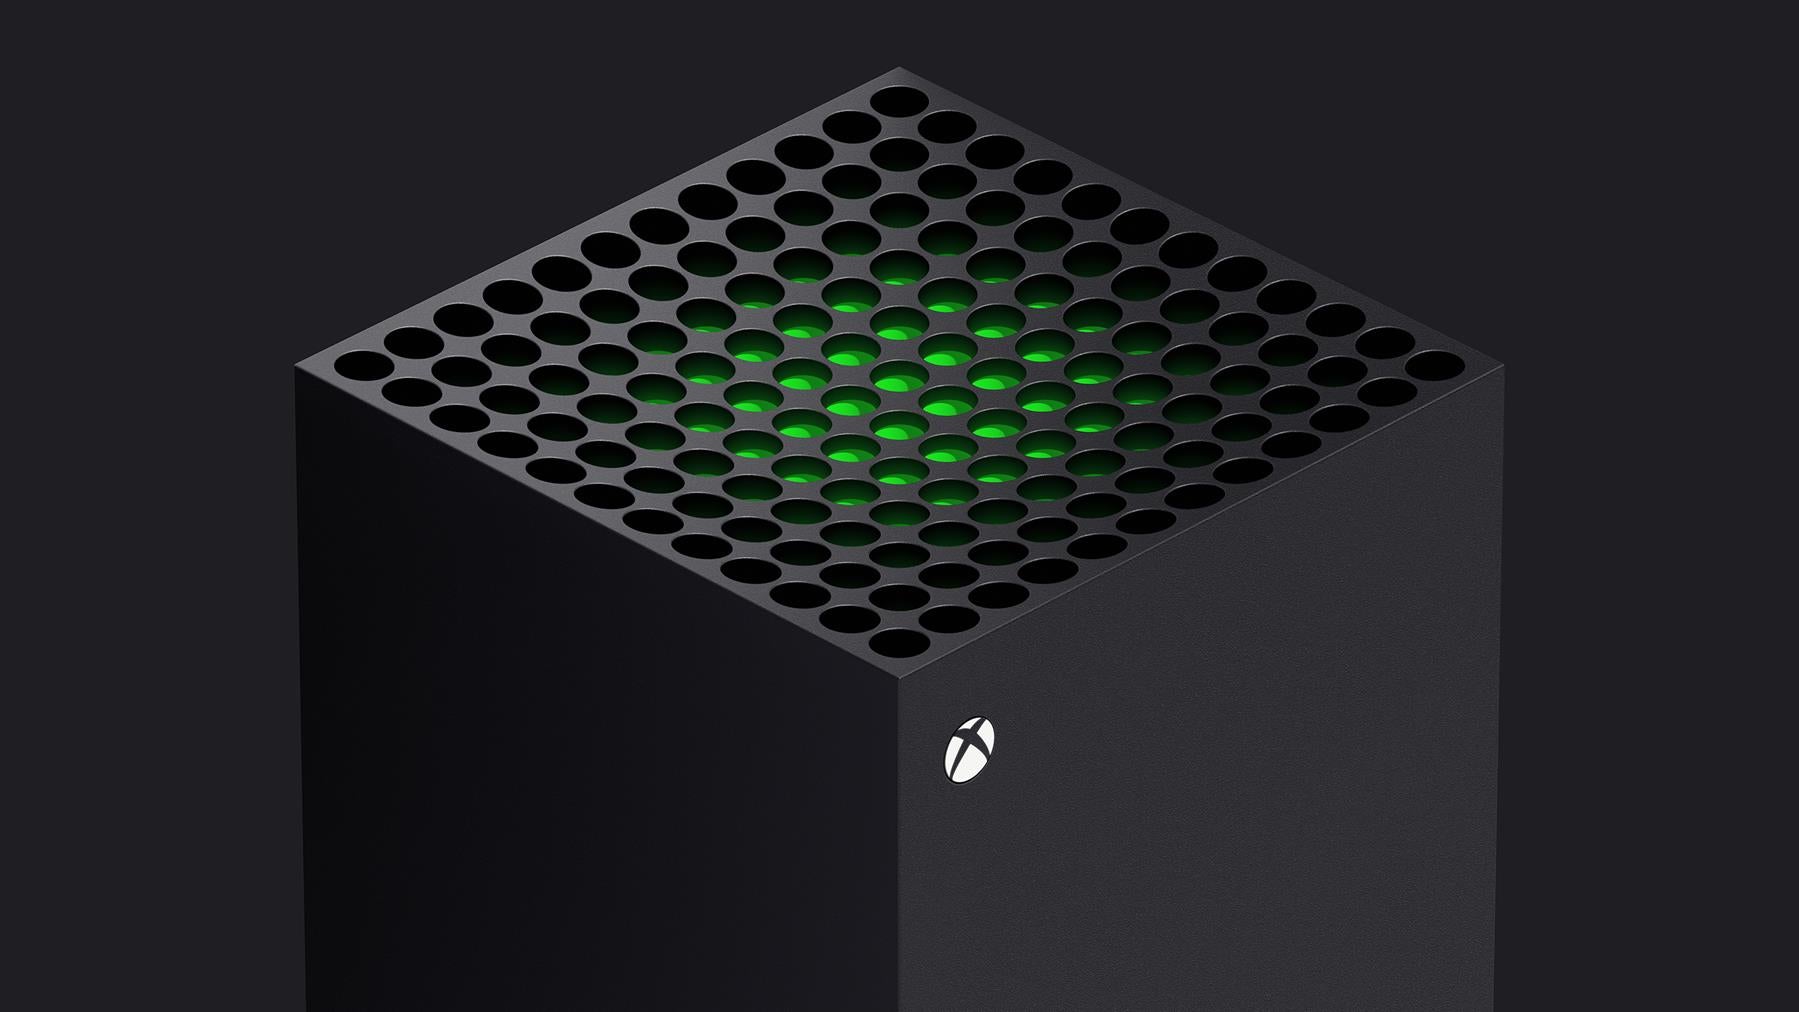 Image for Xbox Series X hardware on track for holiday launch, but game development "the bigger unknown," says Phil Spencer